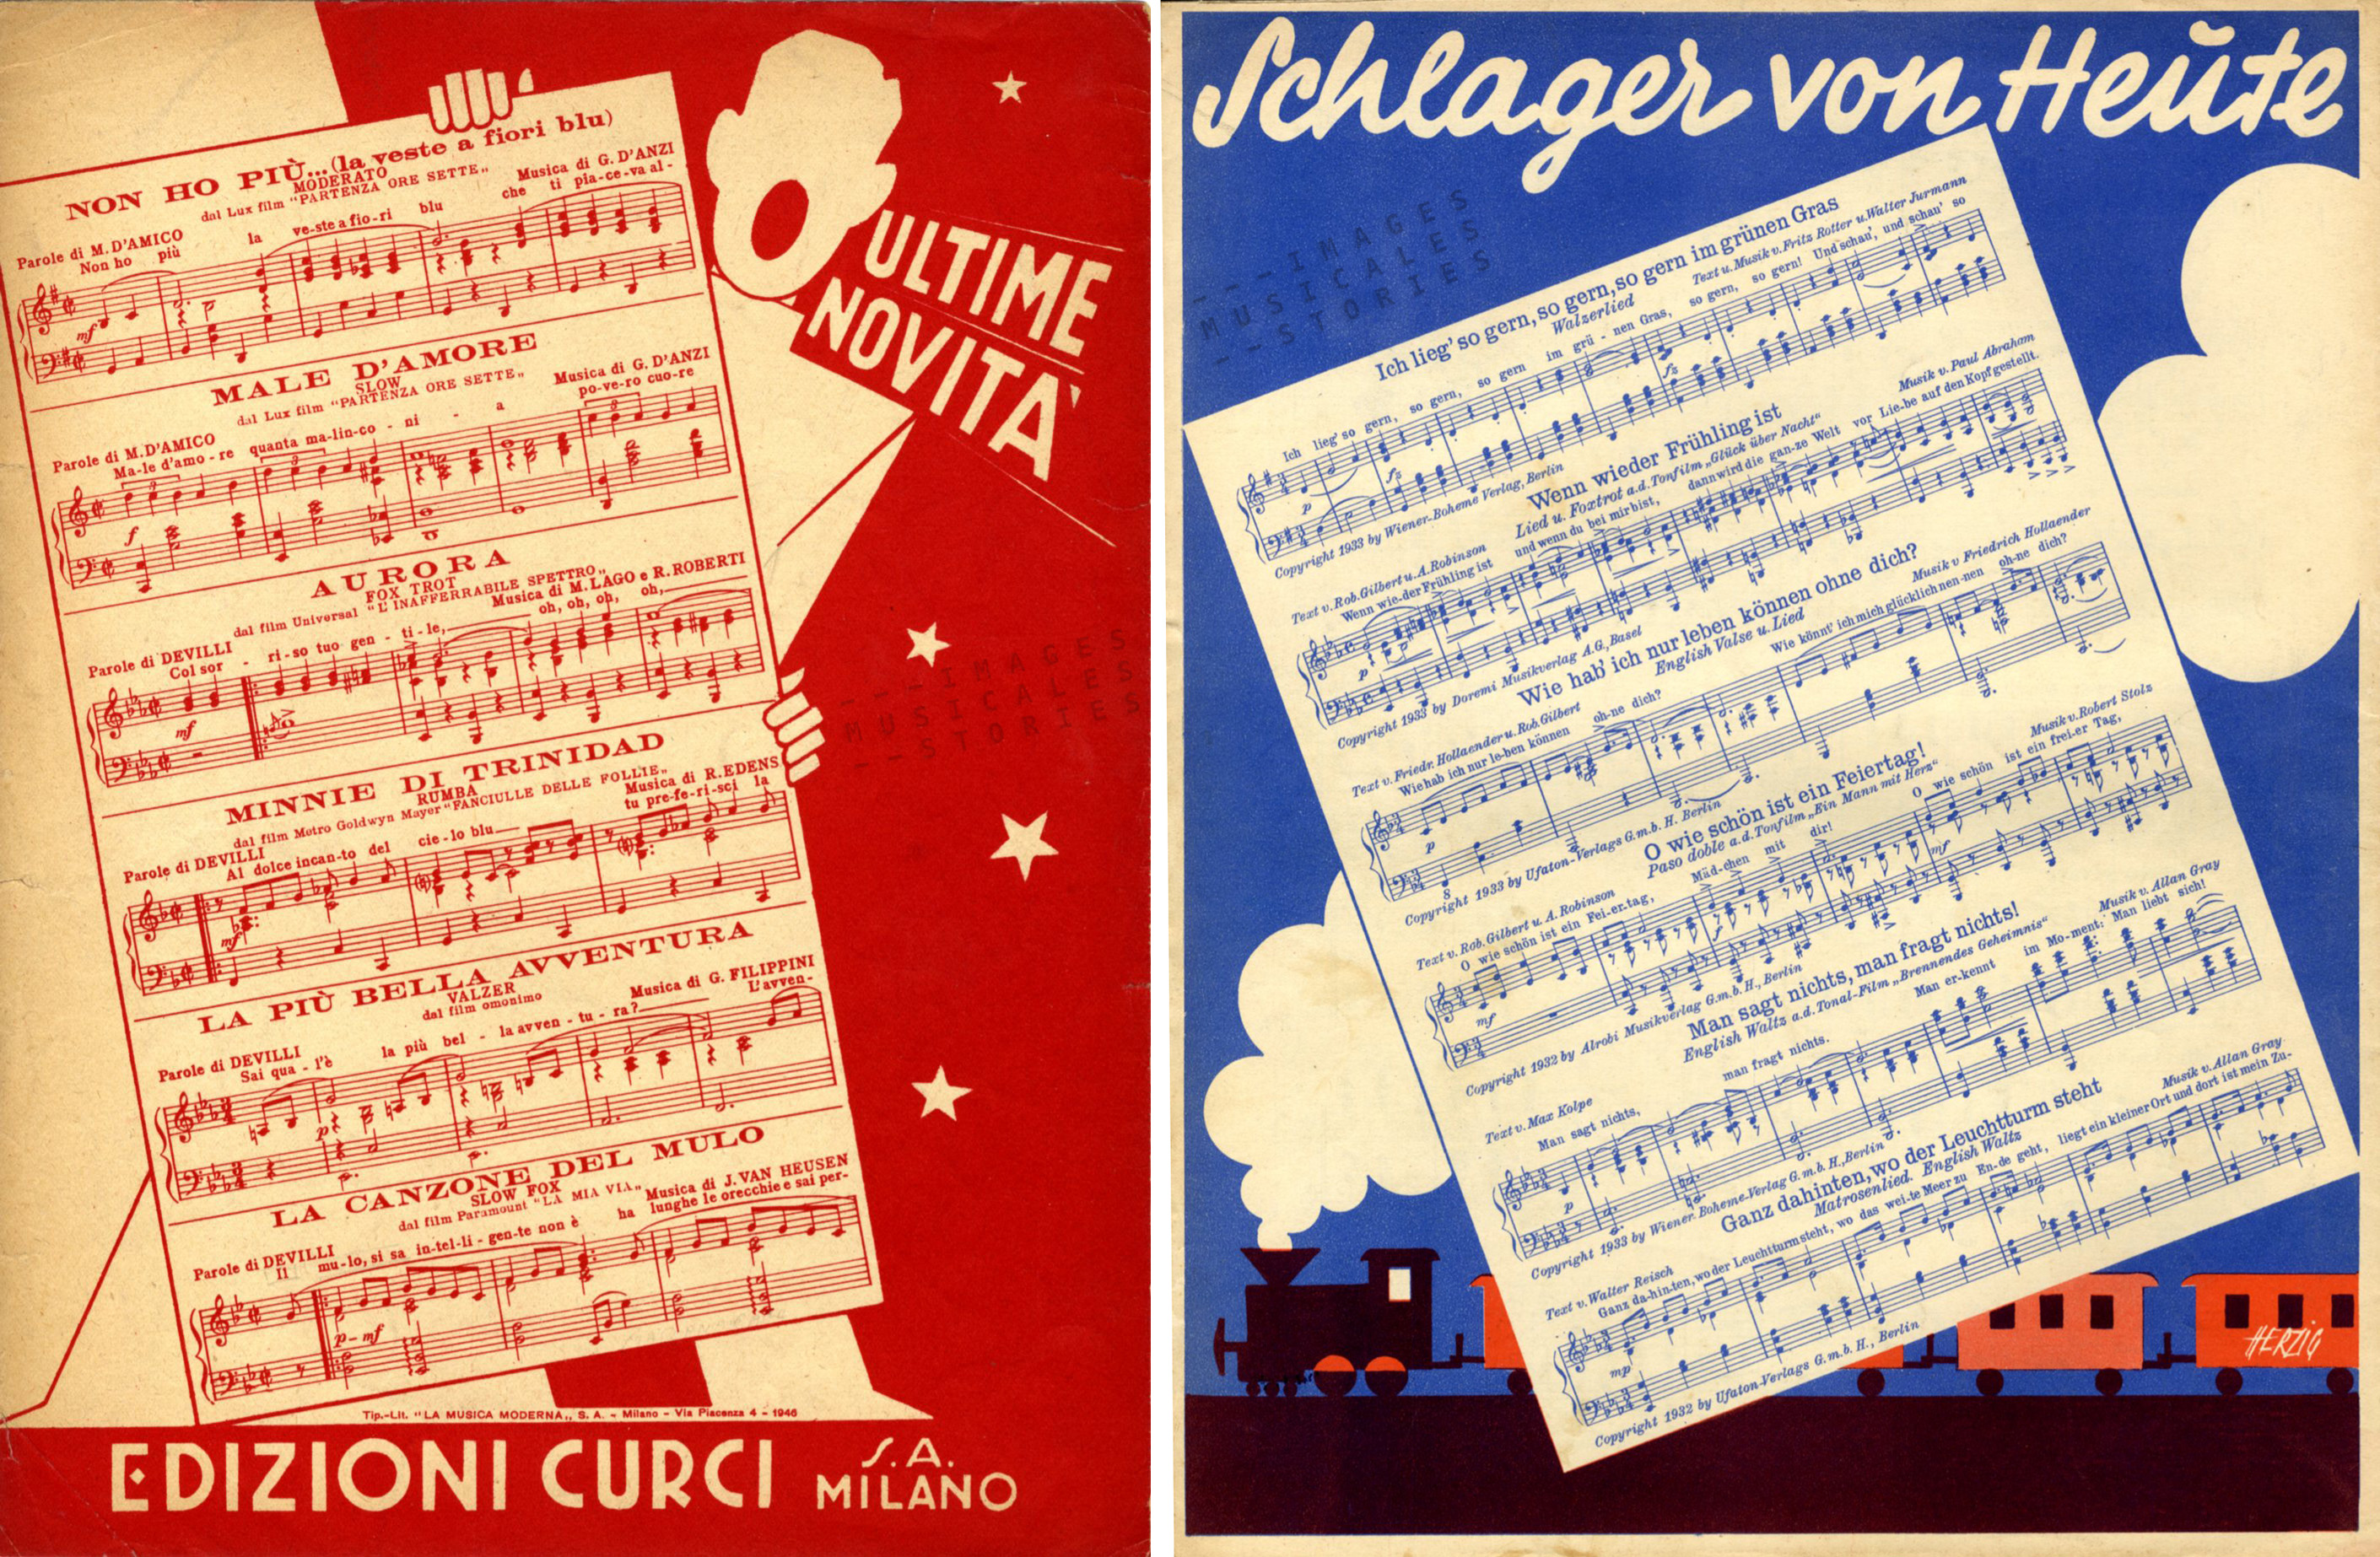 Two similar announcements on the back covers of Edizioni Curci (on the left, unknown illustrator) and UFATON Verlag (right, illustrated by Herzig, s.d.).